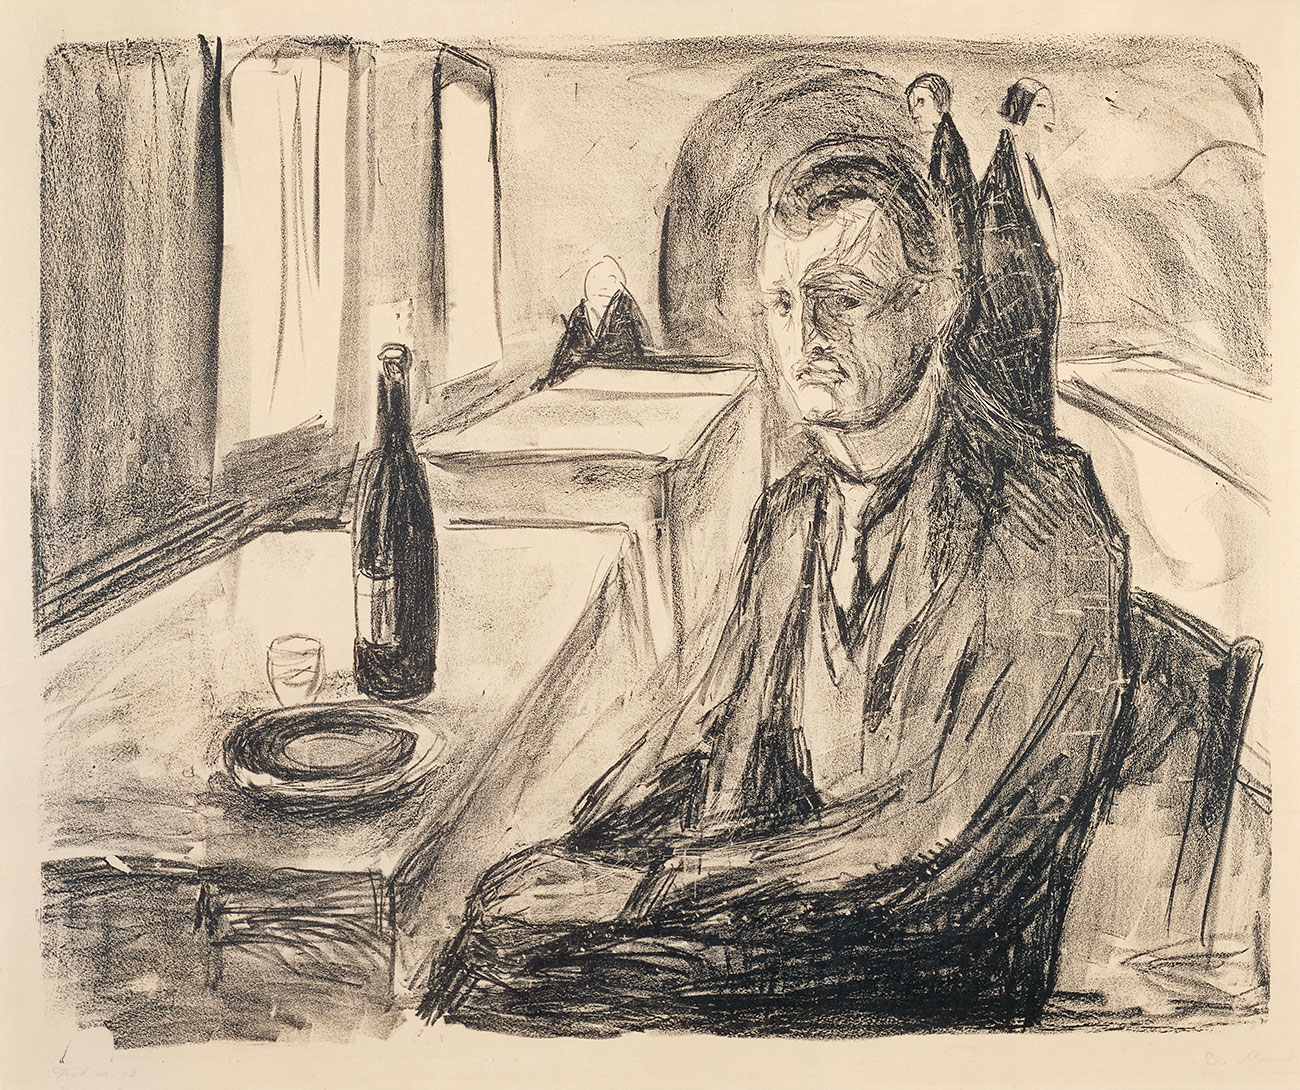 Edvard-Munch-84-Self-Portrait-with-Bottle-of-Wine